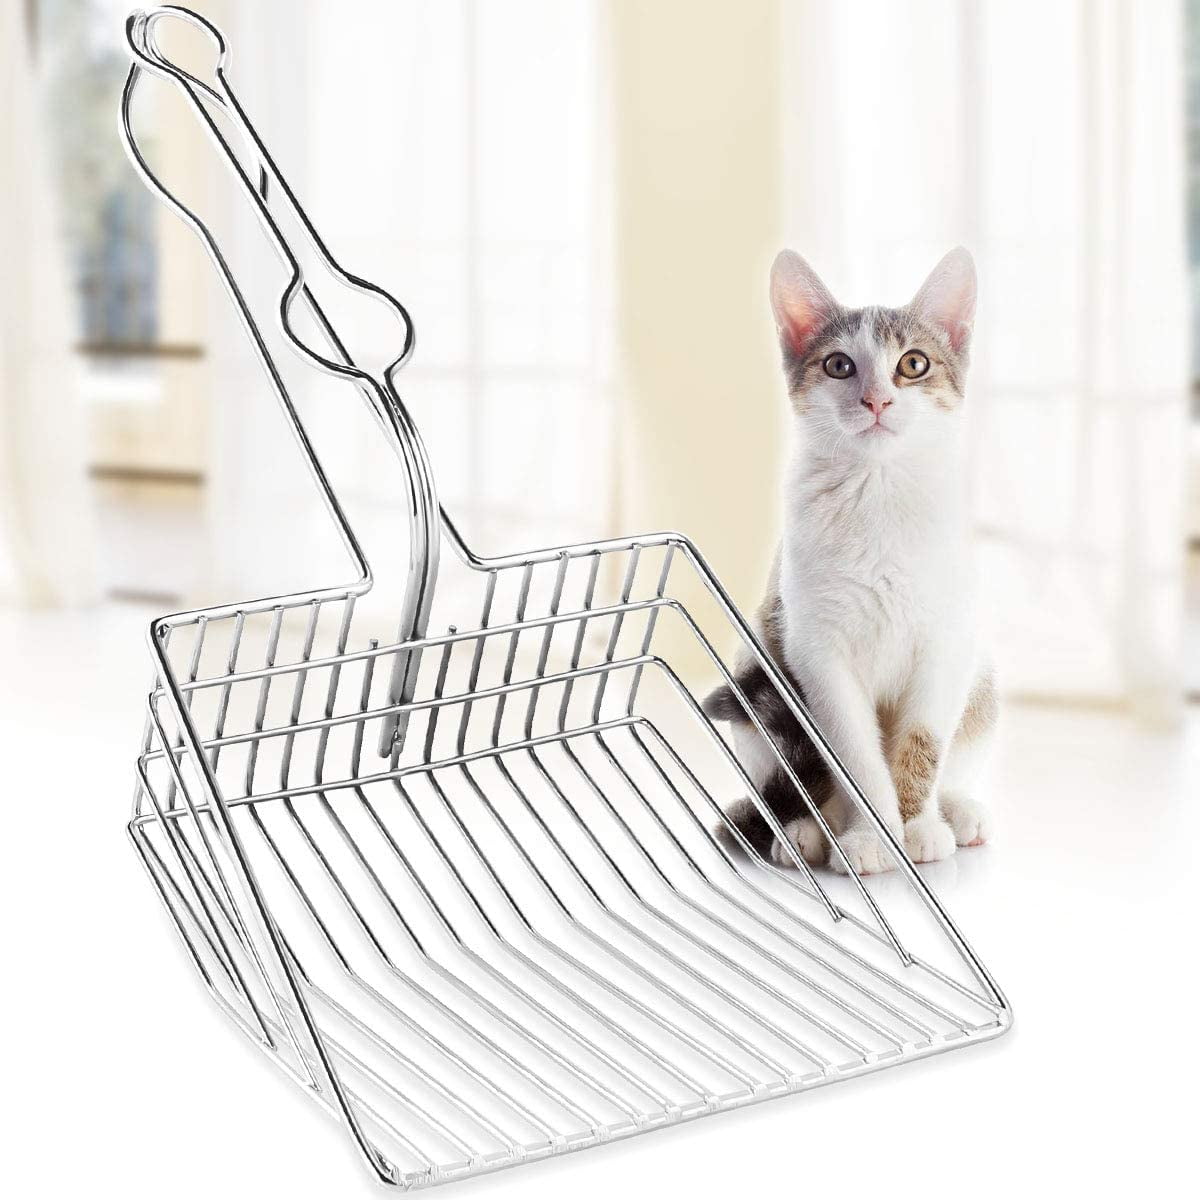 Stainless Steel Pet Dog Cat Litter Shovel Waste Poop Sand Sifter Cleaning Scoop 